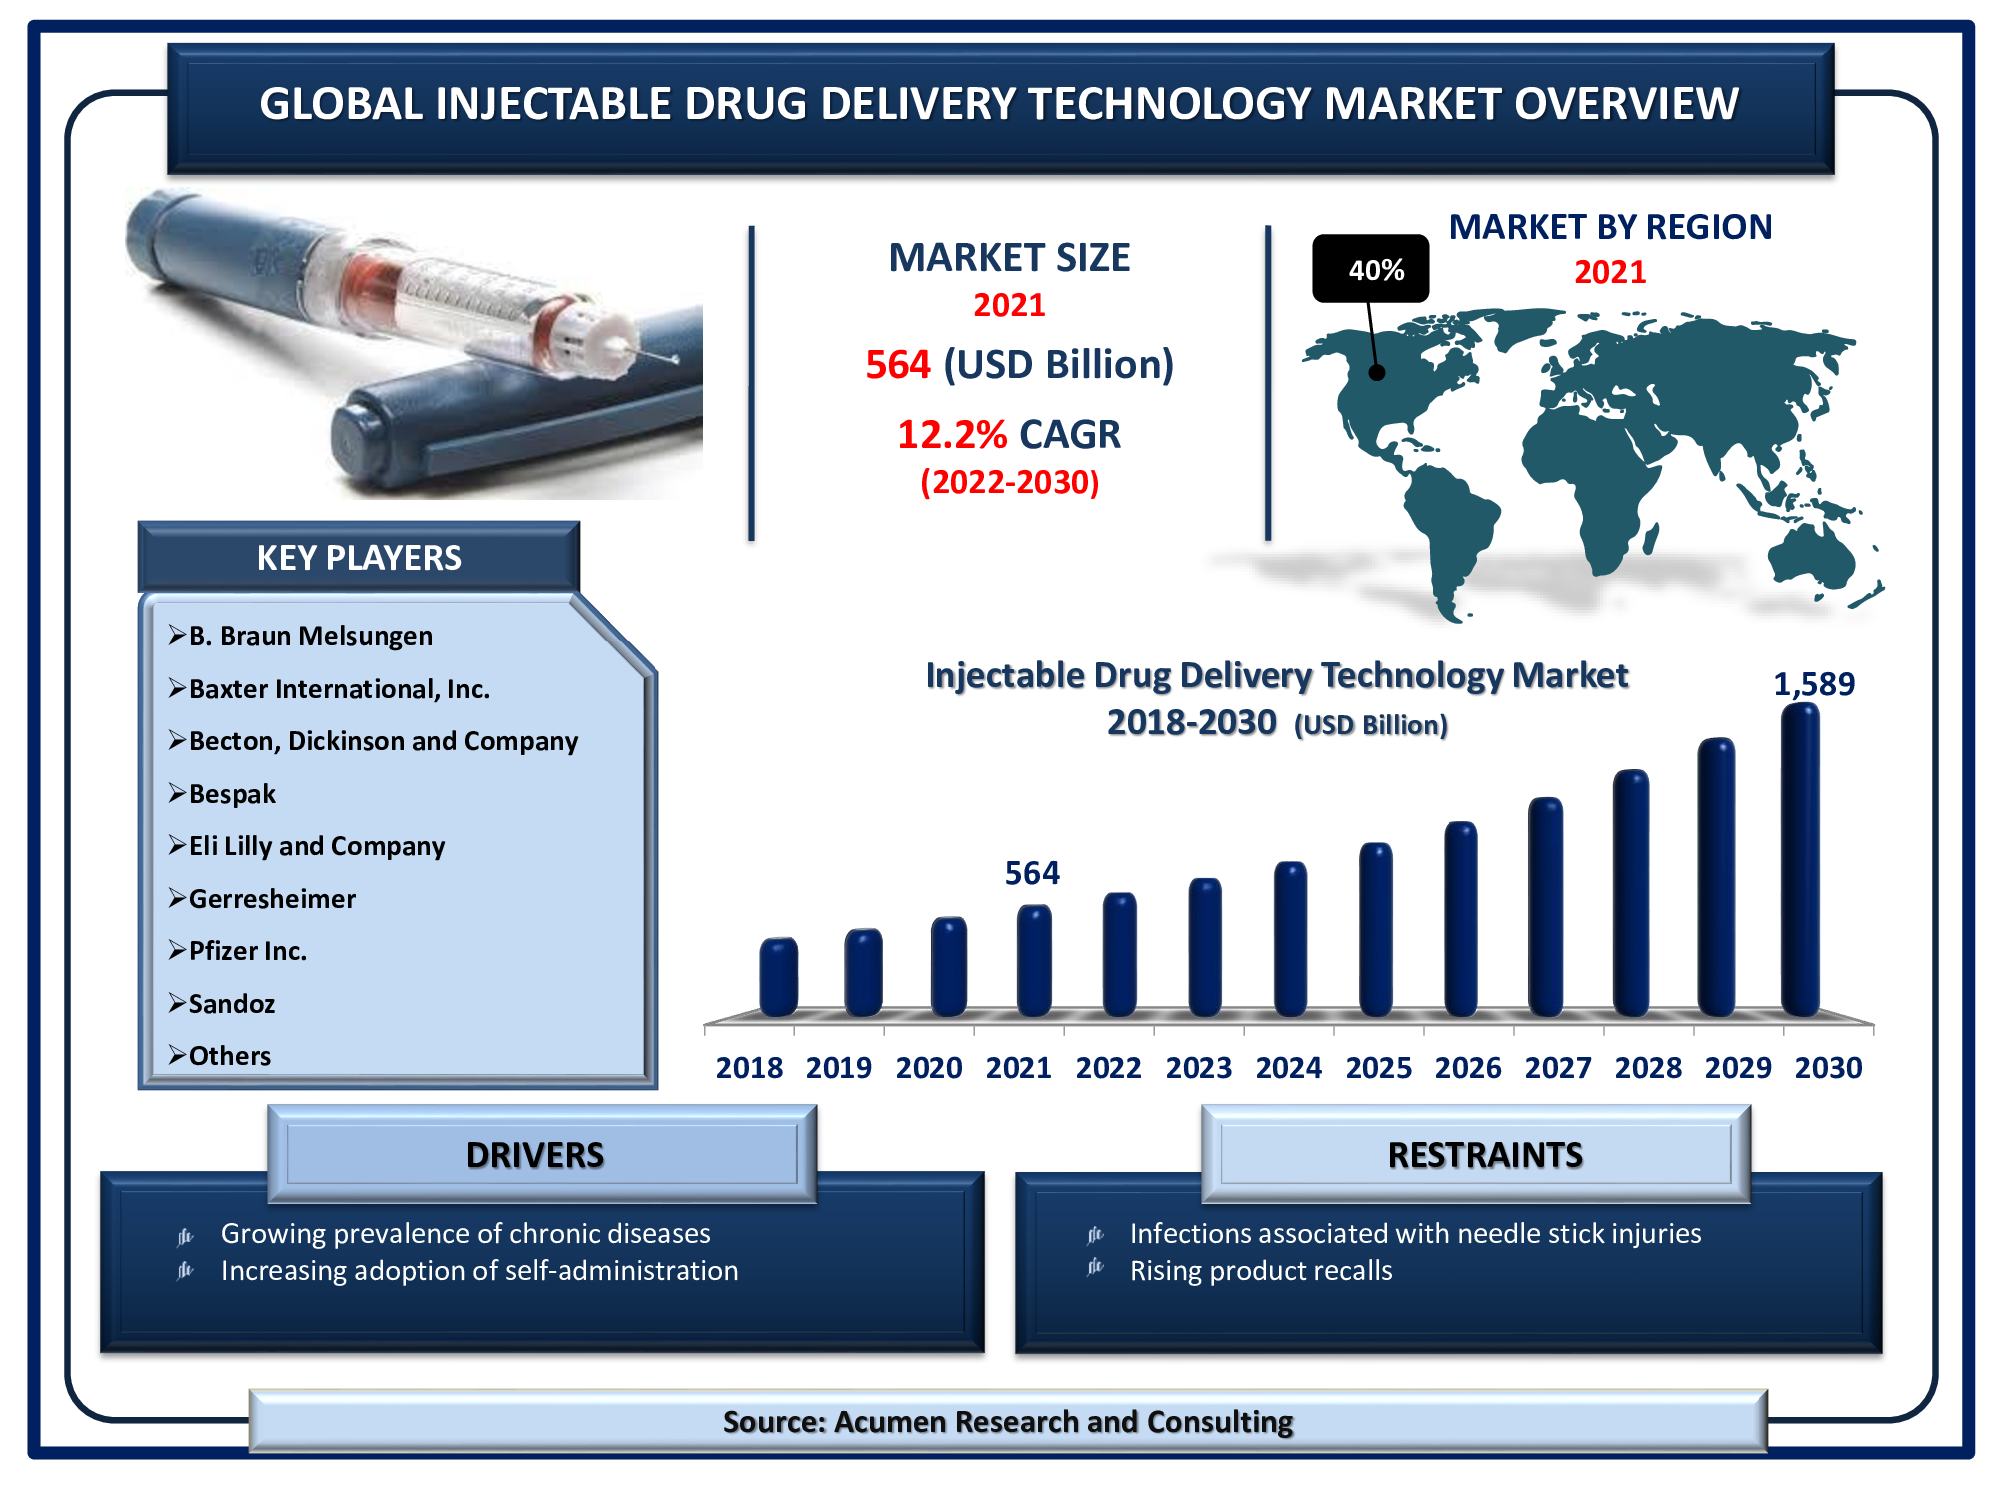 The Global Injectable Drug Delivery Technology Market Size is valued at USD 564 Billion in 2021 and is estimated to achieve a market size of USD 1,589 Billion by 2030; growing at a CAGR of 12.2%.